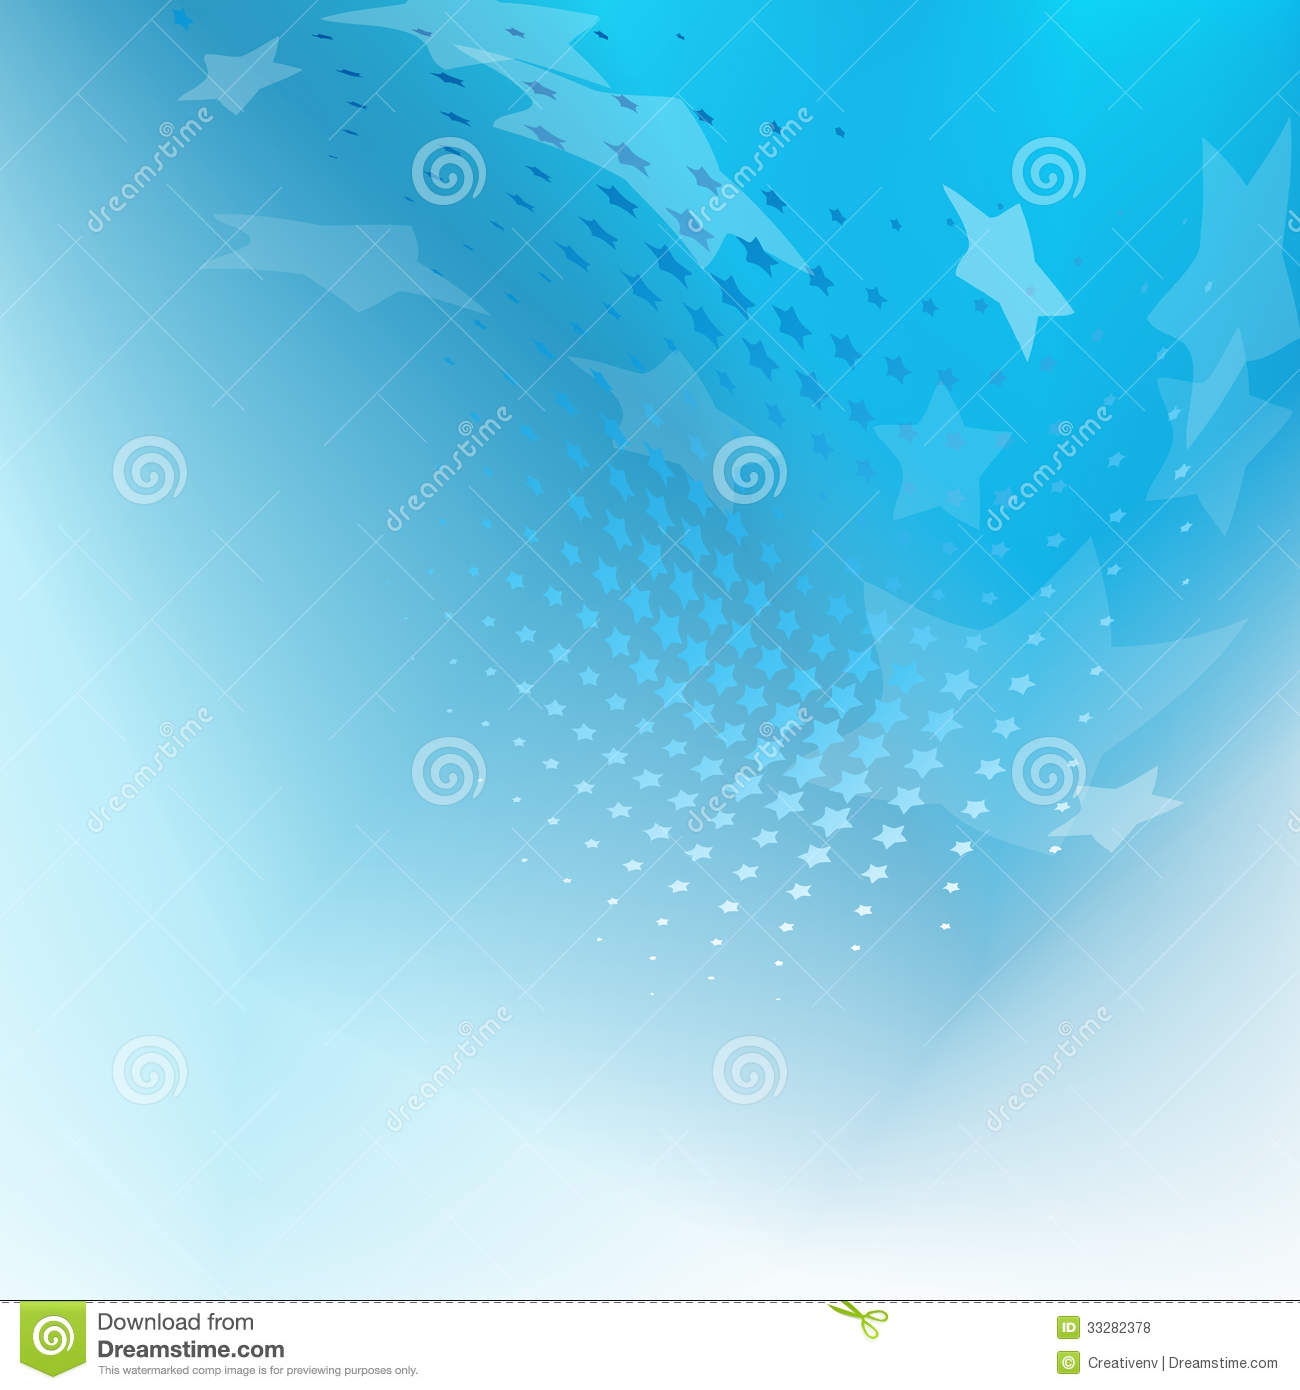 Blue Abstract Swirl Vector Free